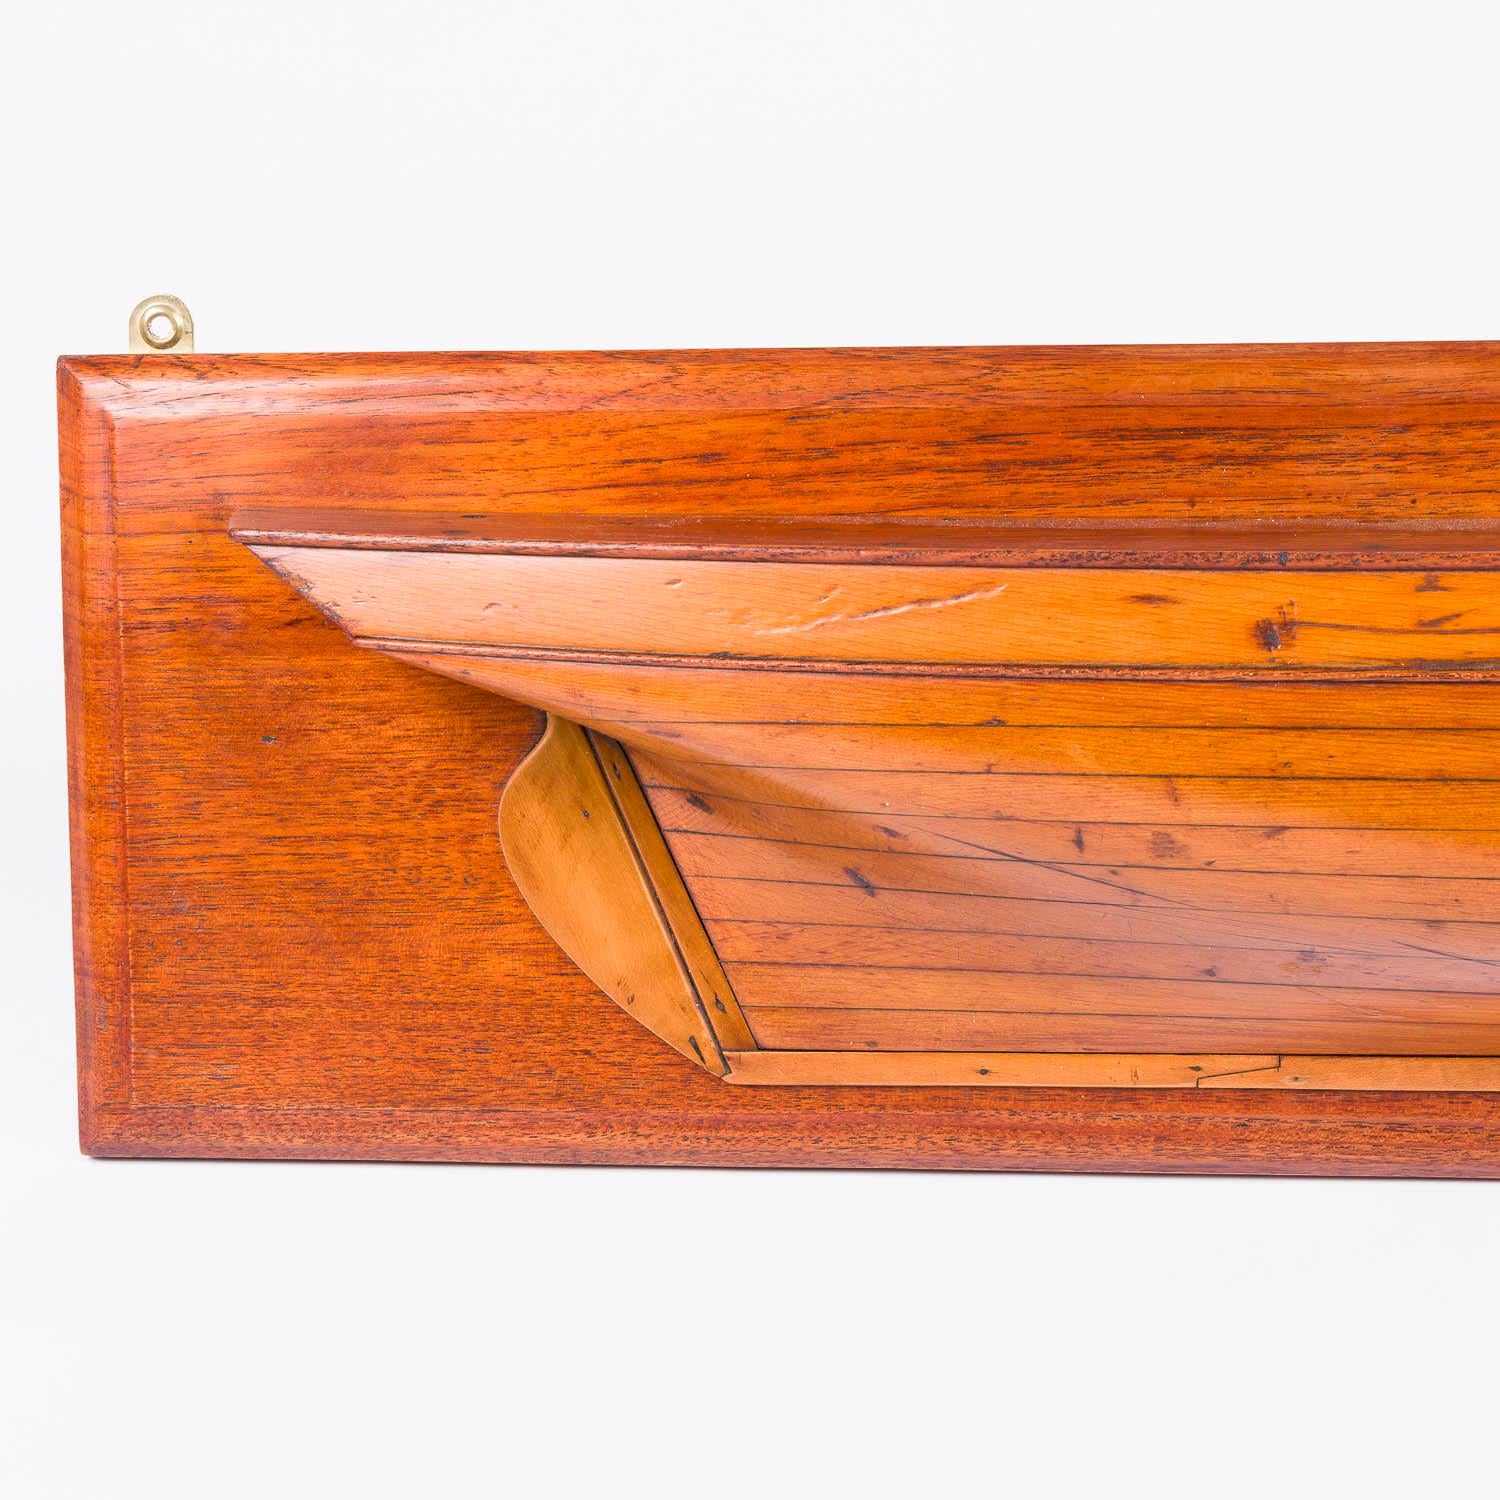 Teak Half hull model of the starboard side of a Barque